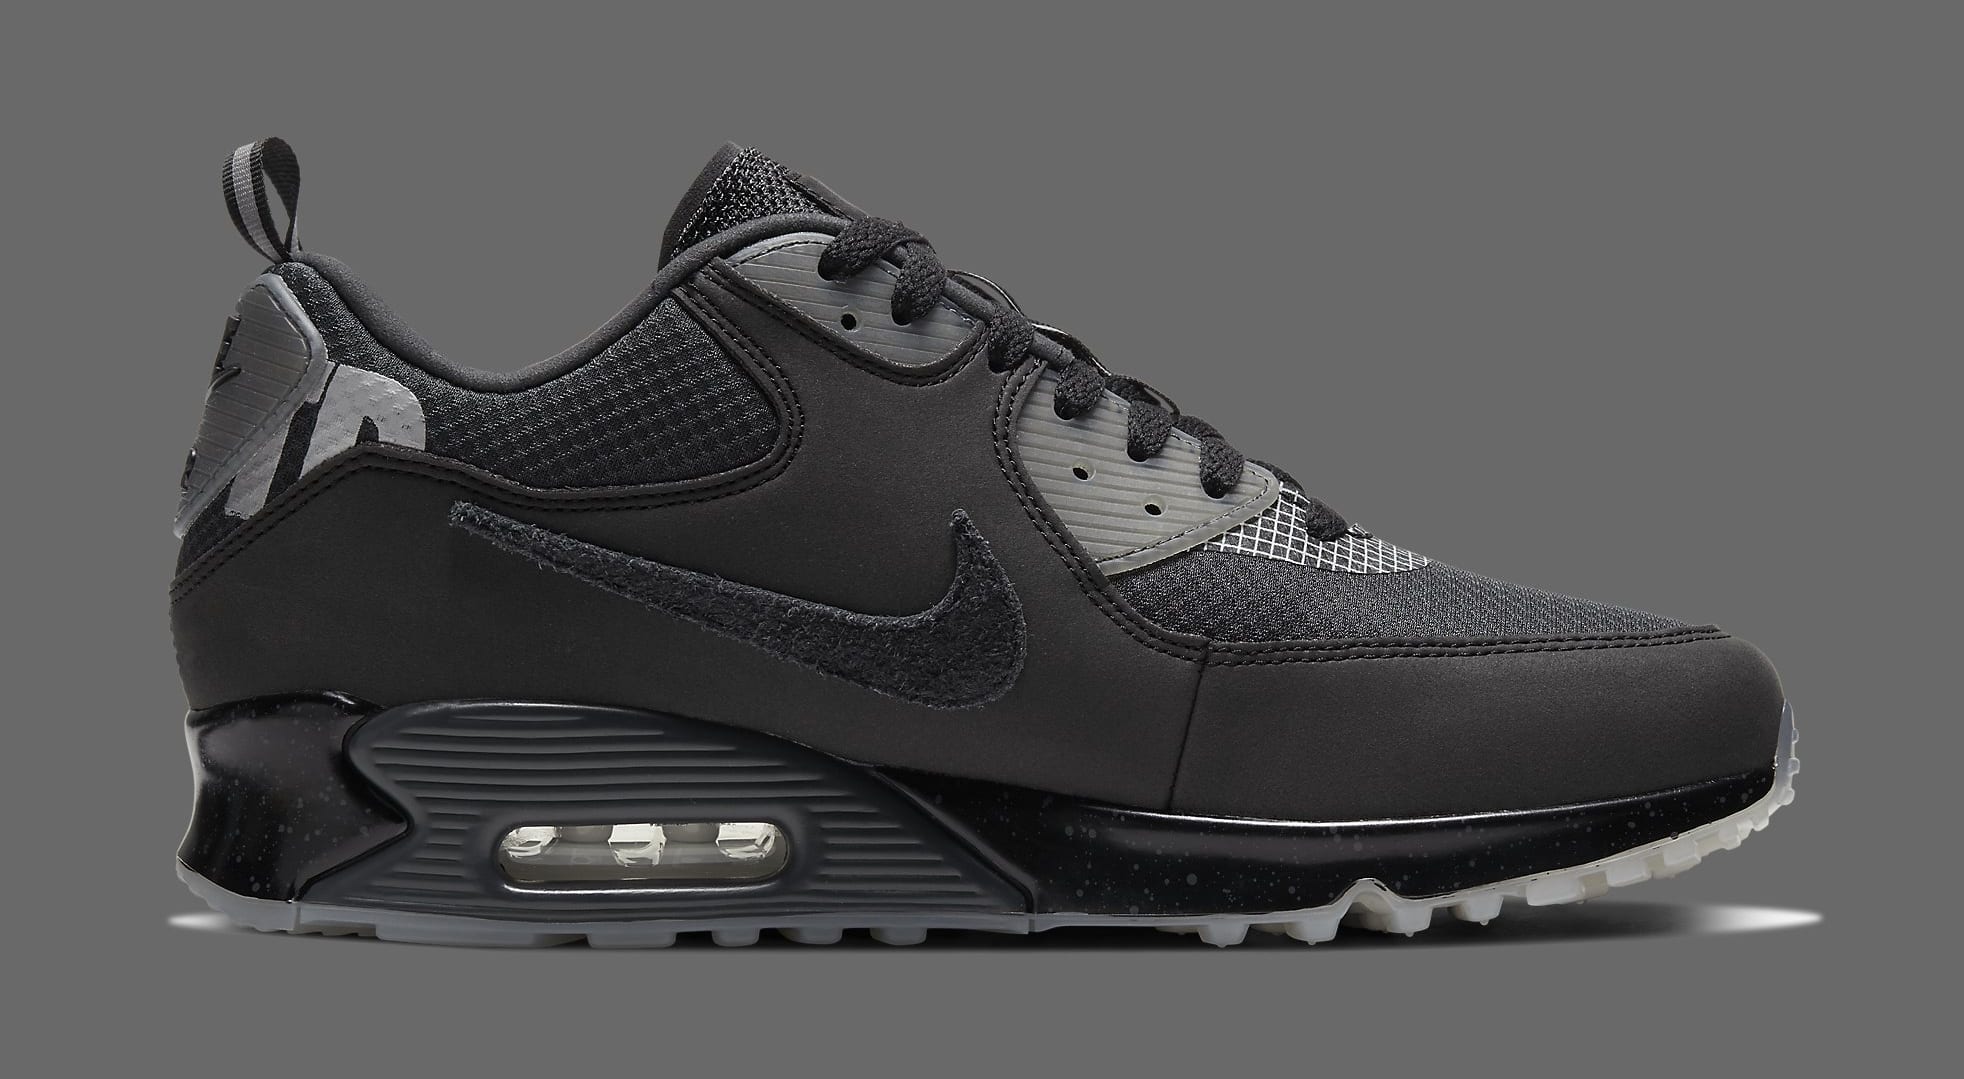 undefeated-nike-air-max-90-black-cq2289-002-medial